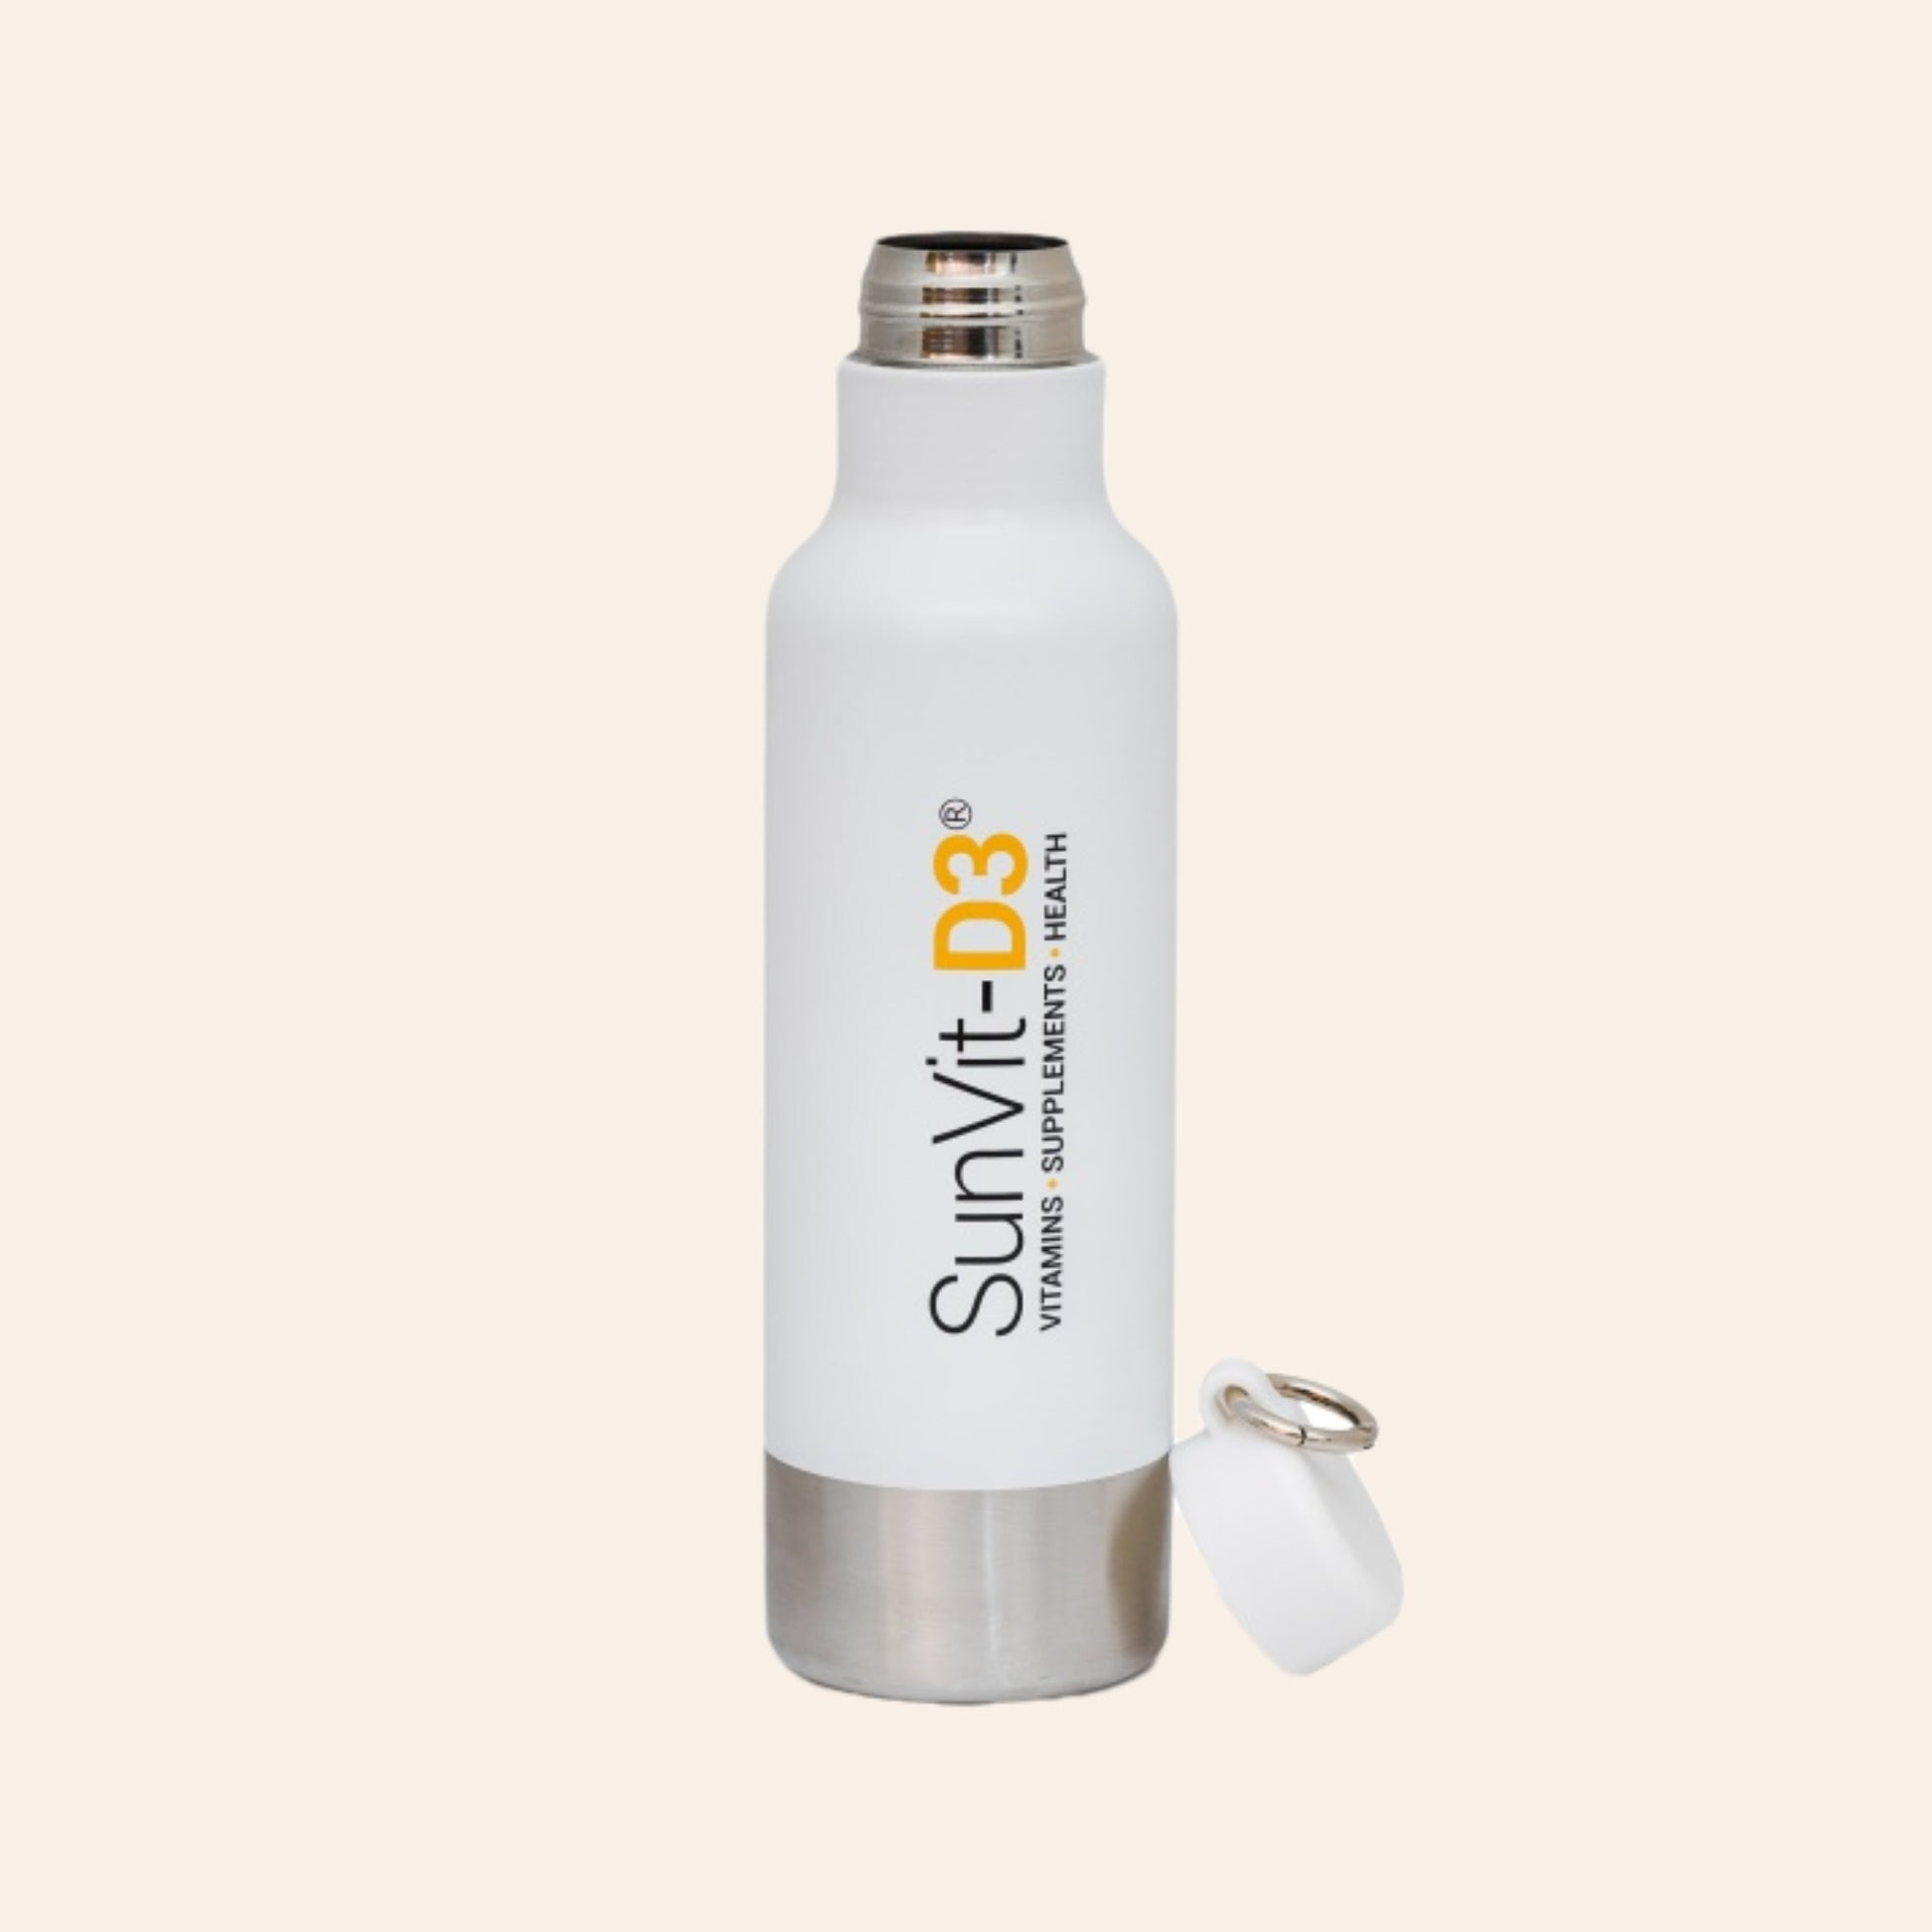 750ml Cold Water Hydration Bottle, For Travel or Sports - SunVit-D3